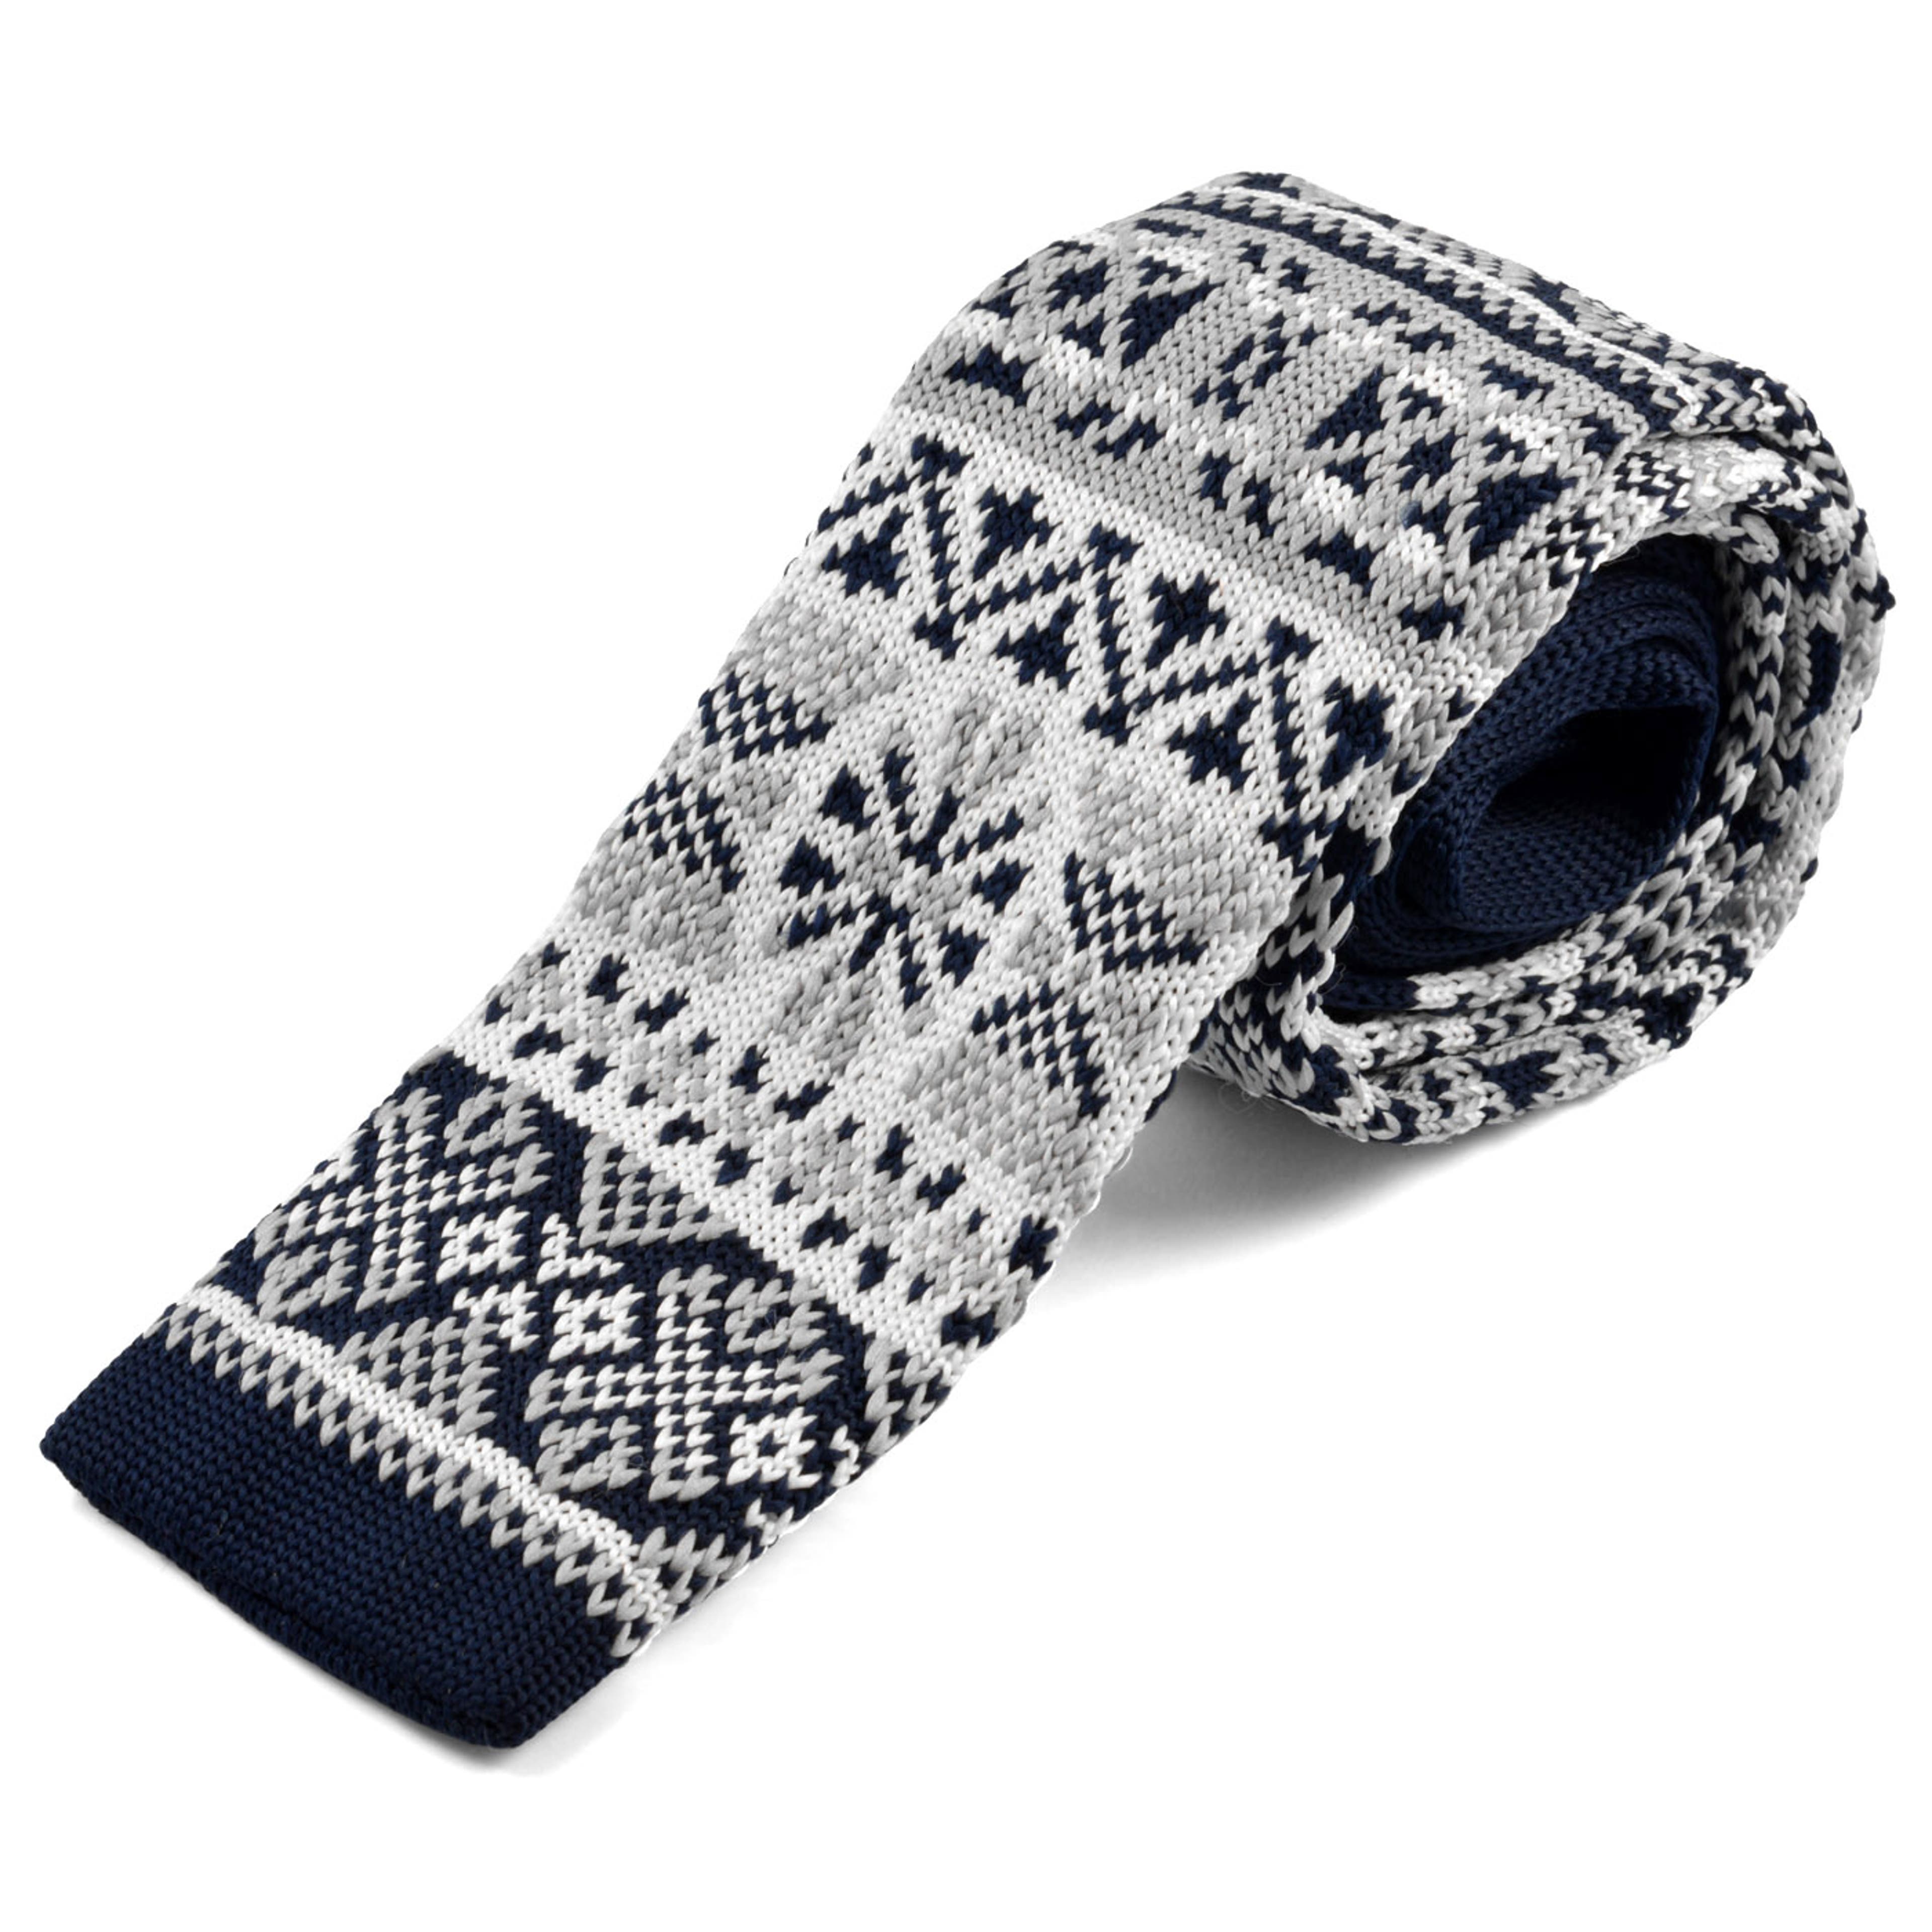 Nordic Patterned Knitted Tie